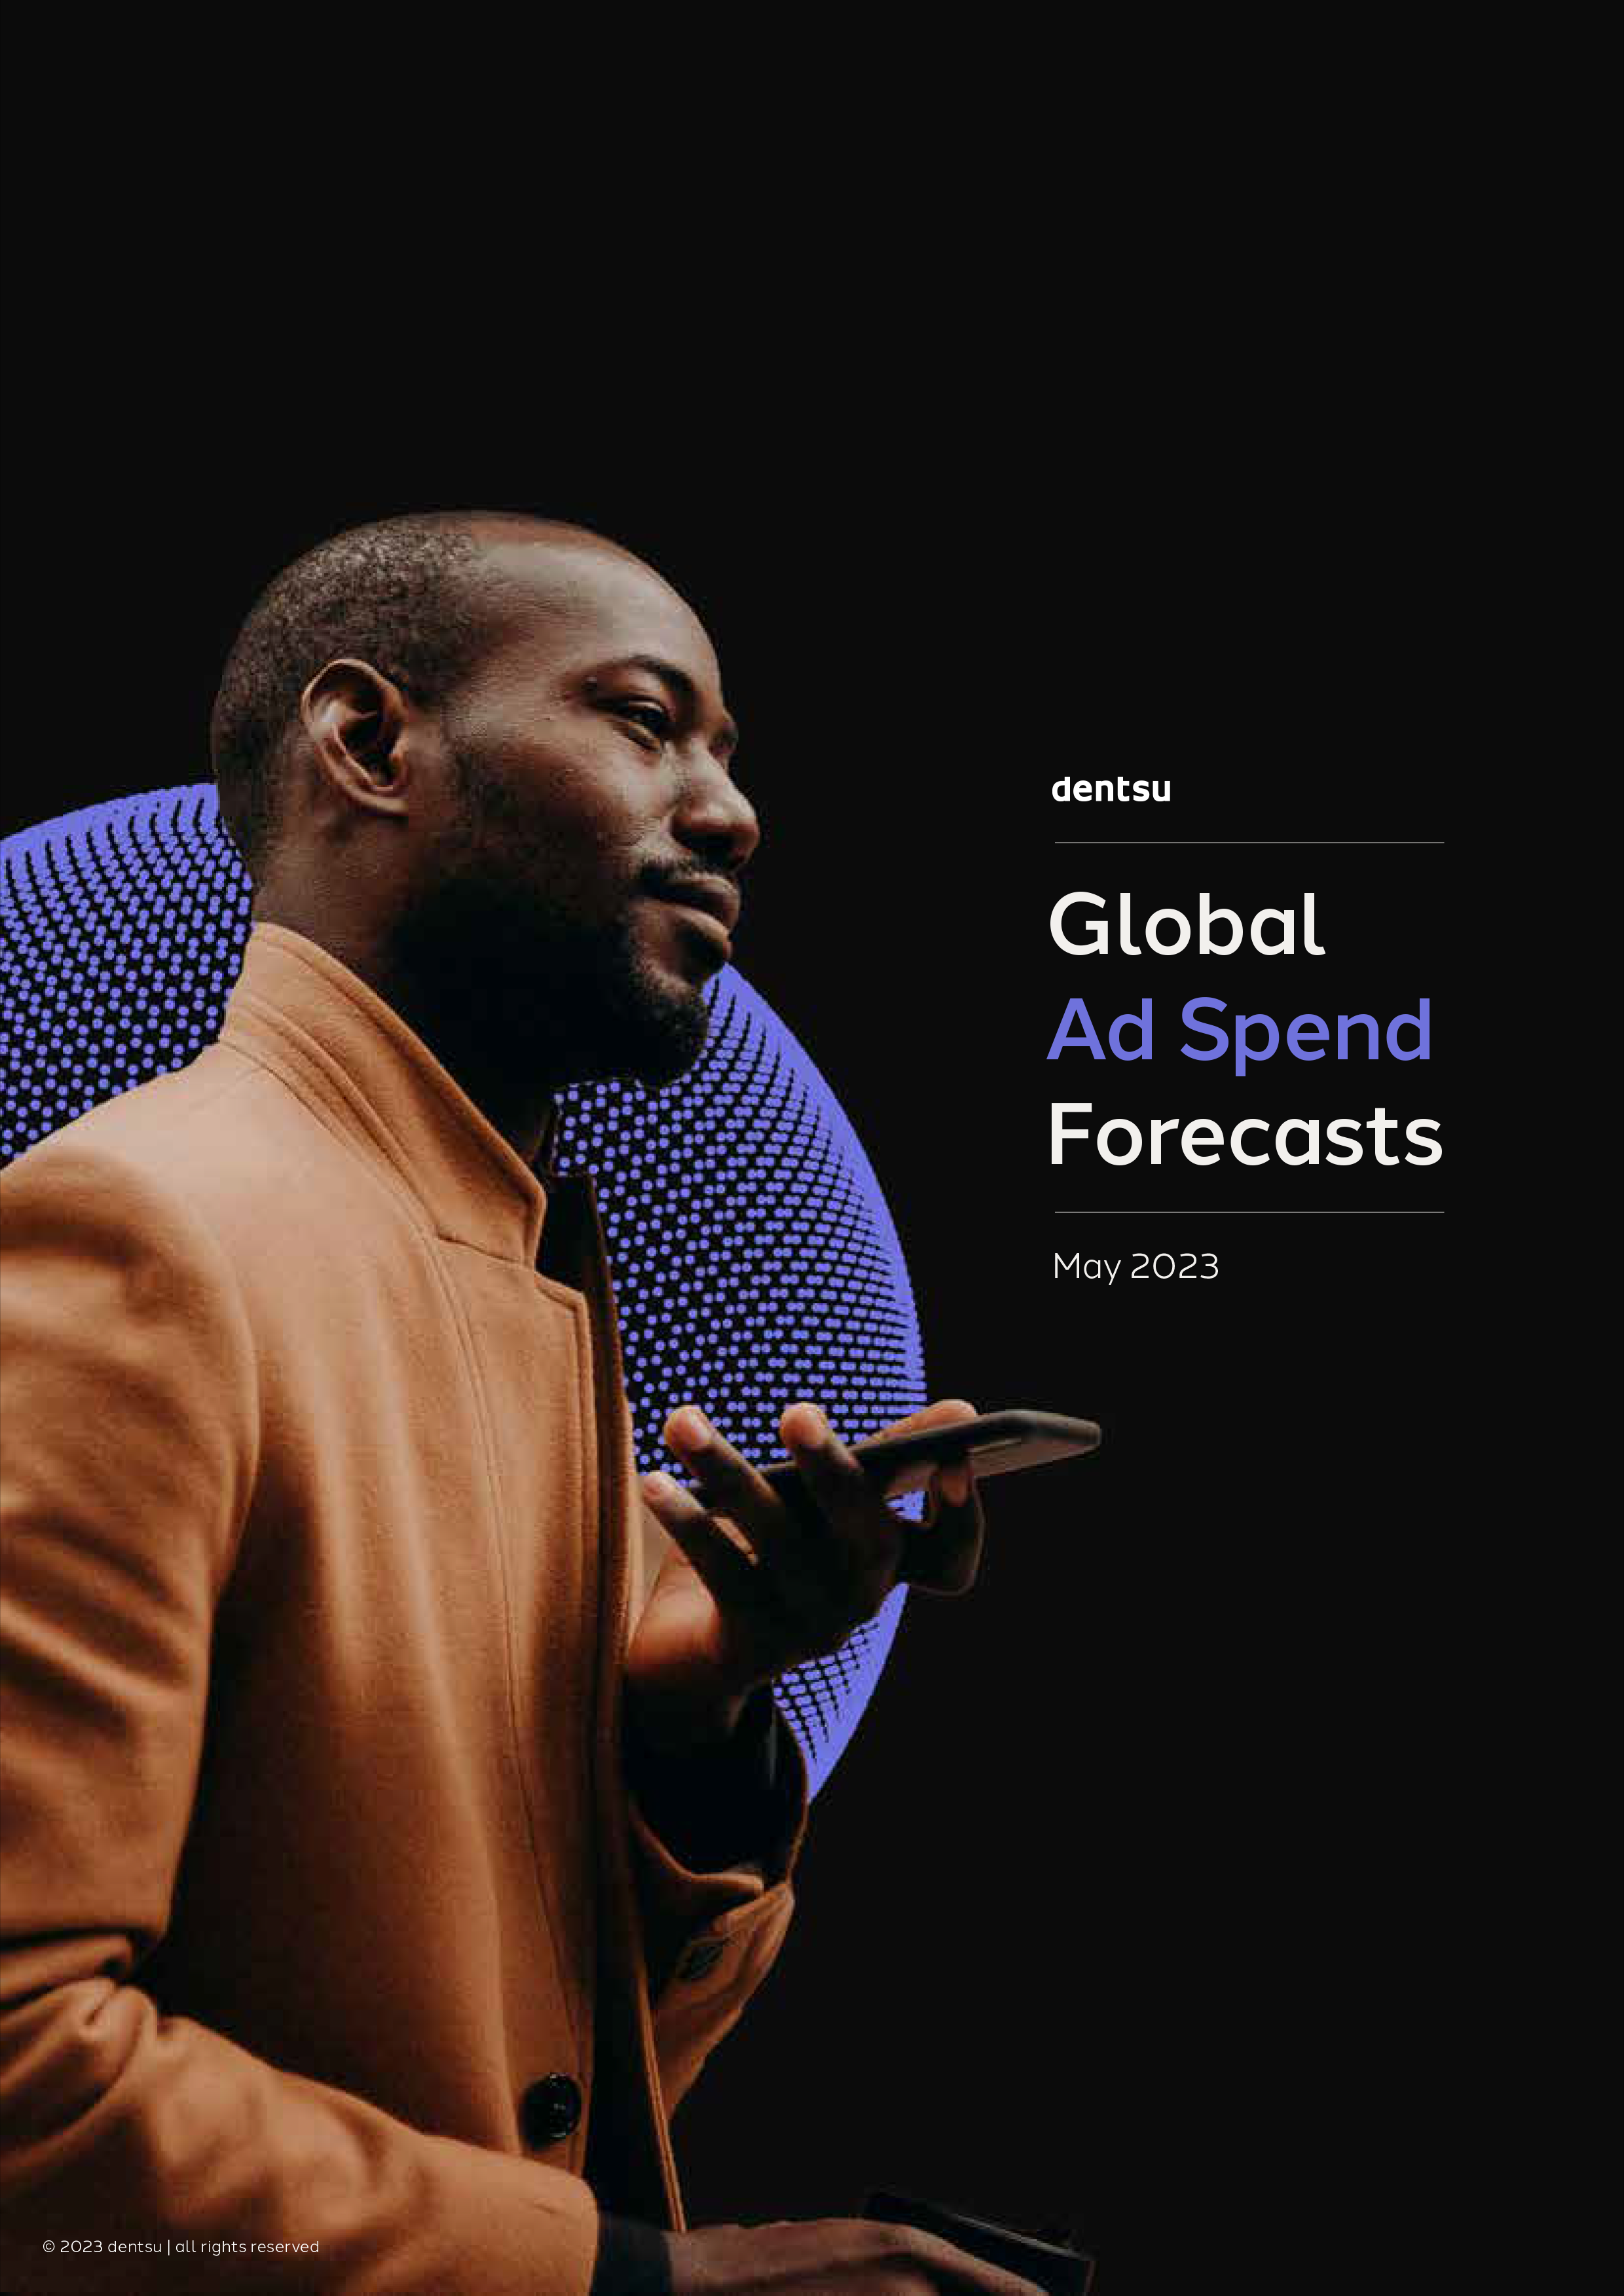 Dentsu Global Ad Spend Forecasts May 2023